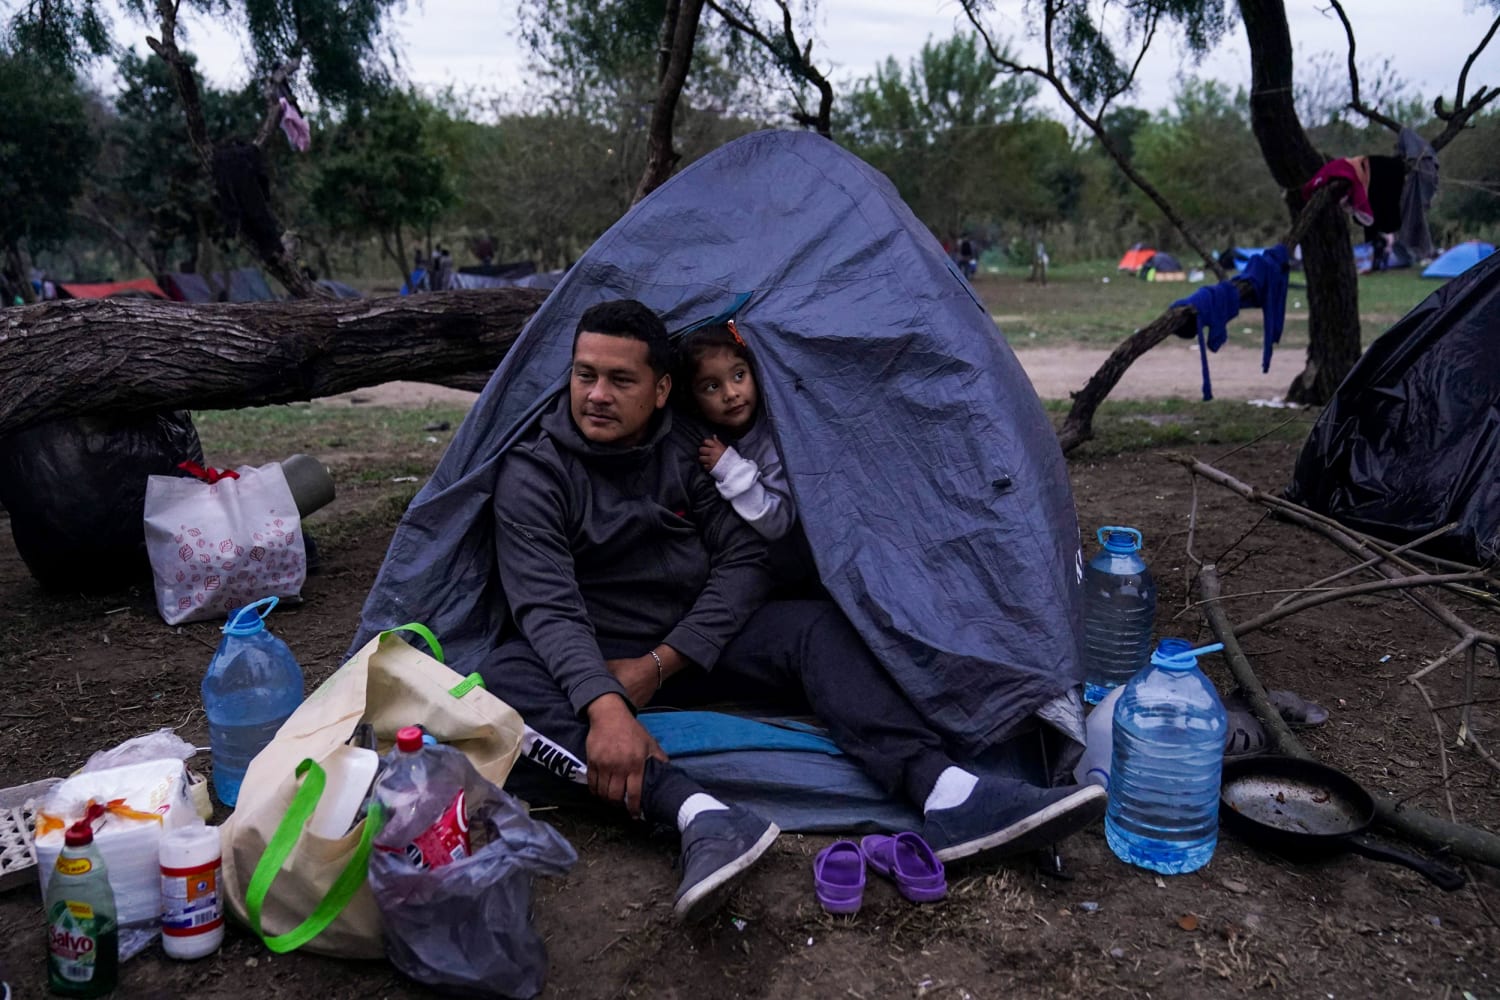 Thousands wait in tent camps in Mexico for a chance to cross the border